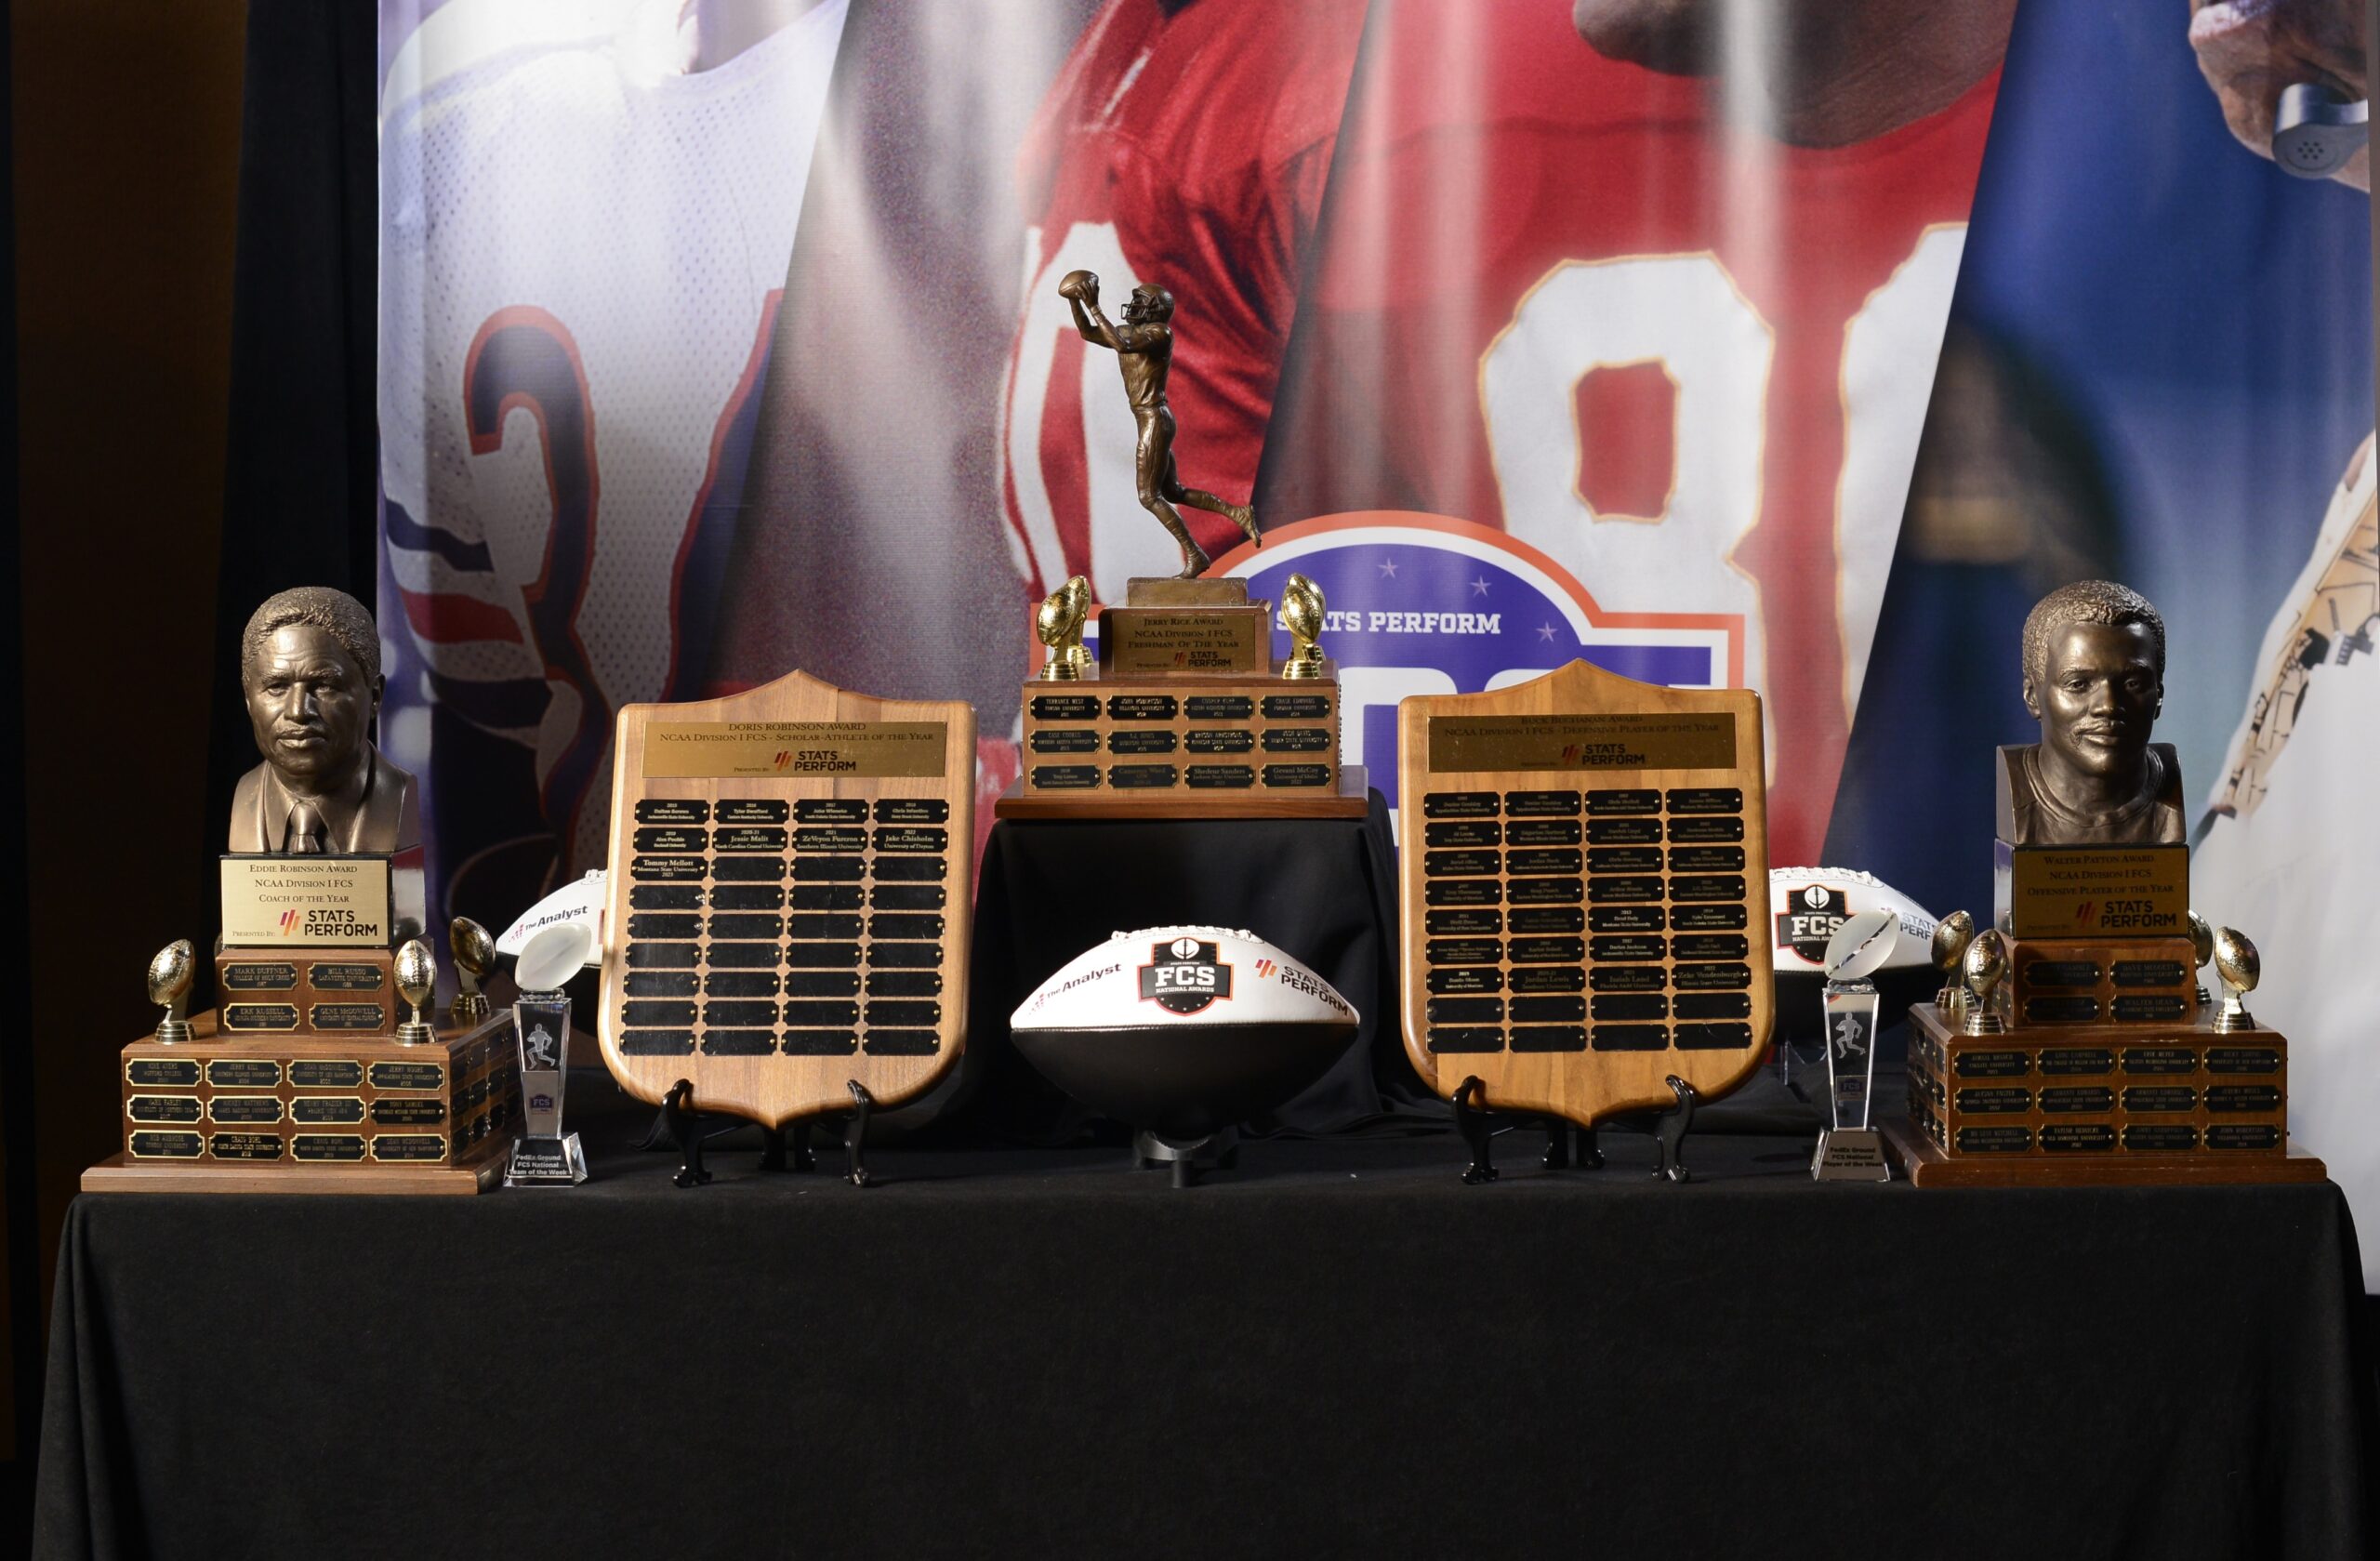 It’s Time to Represent: All-Time FCS National Awards Winners by School